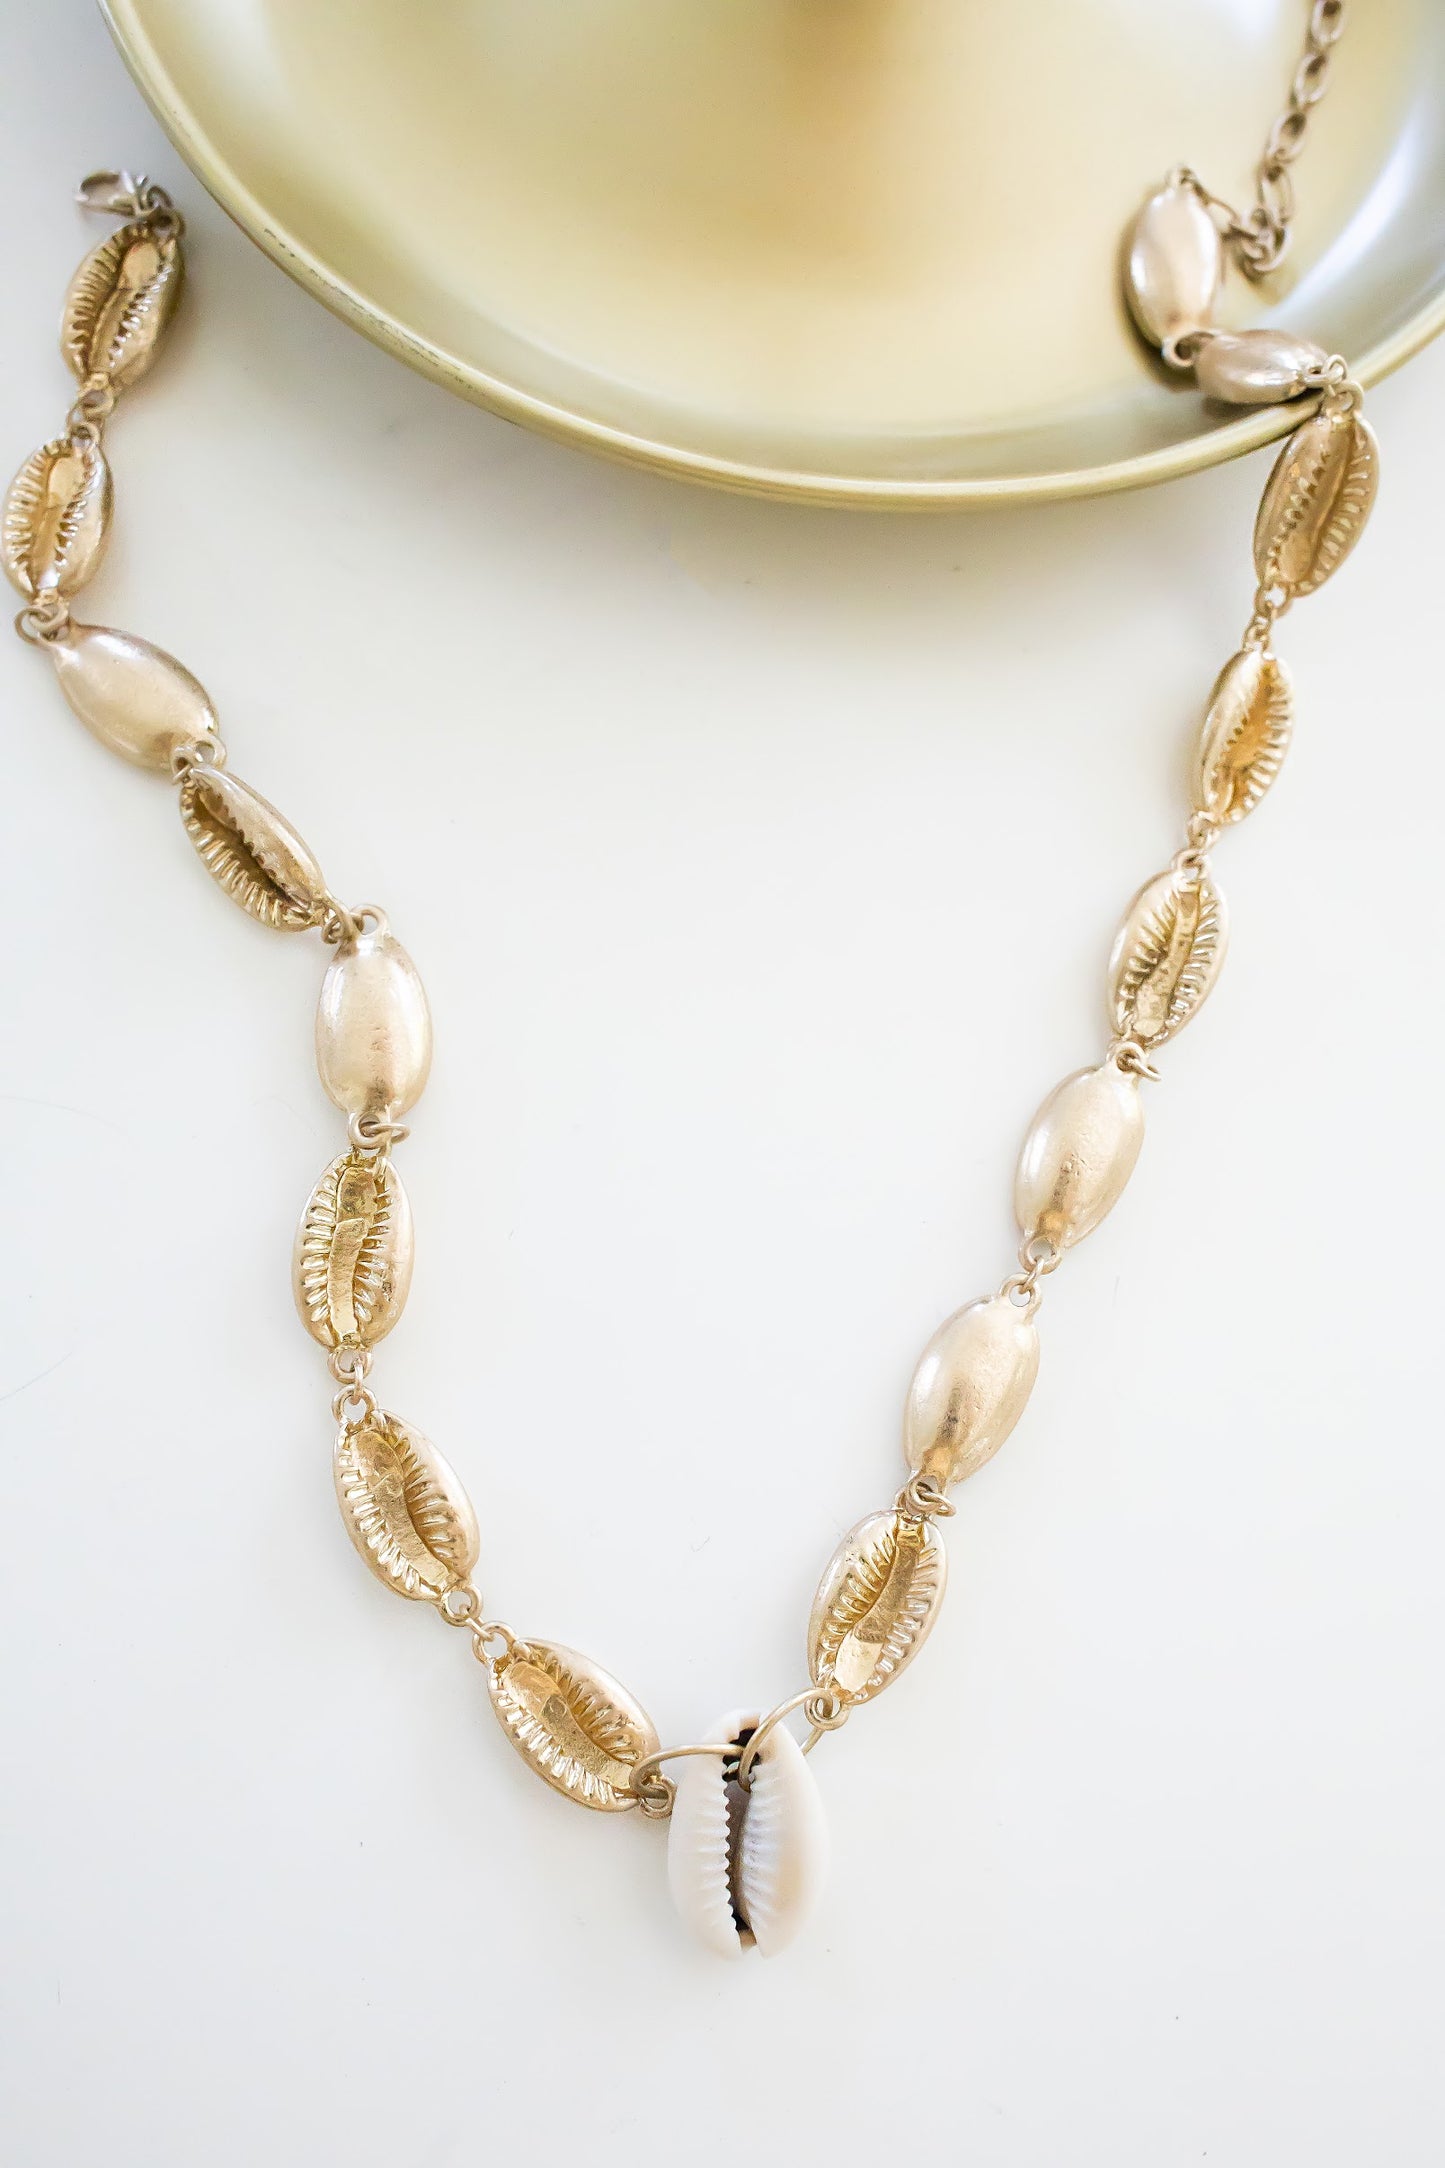 Samantha Puka Shell Necklace | Gold Puka Shell Chain with Natural Puka Shell Accent | Boho Beach Babe Accessories | Single Strand Sea Shell Necklace